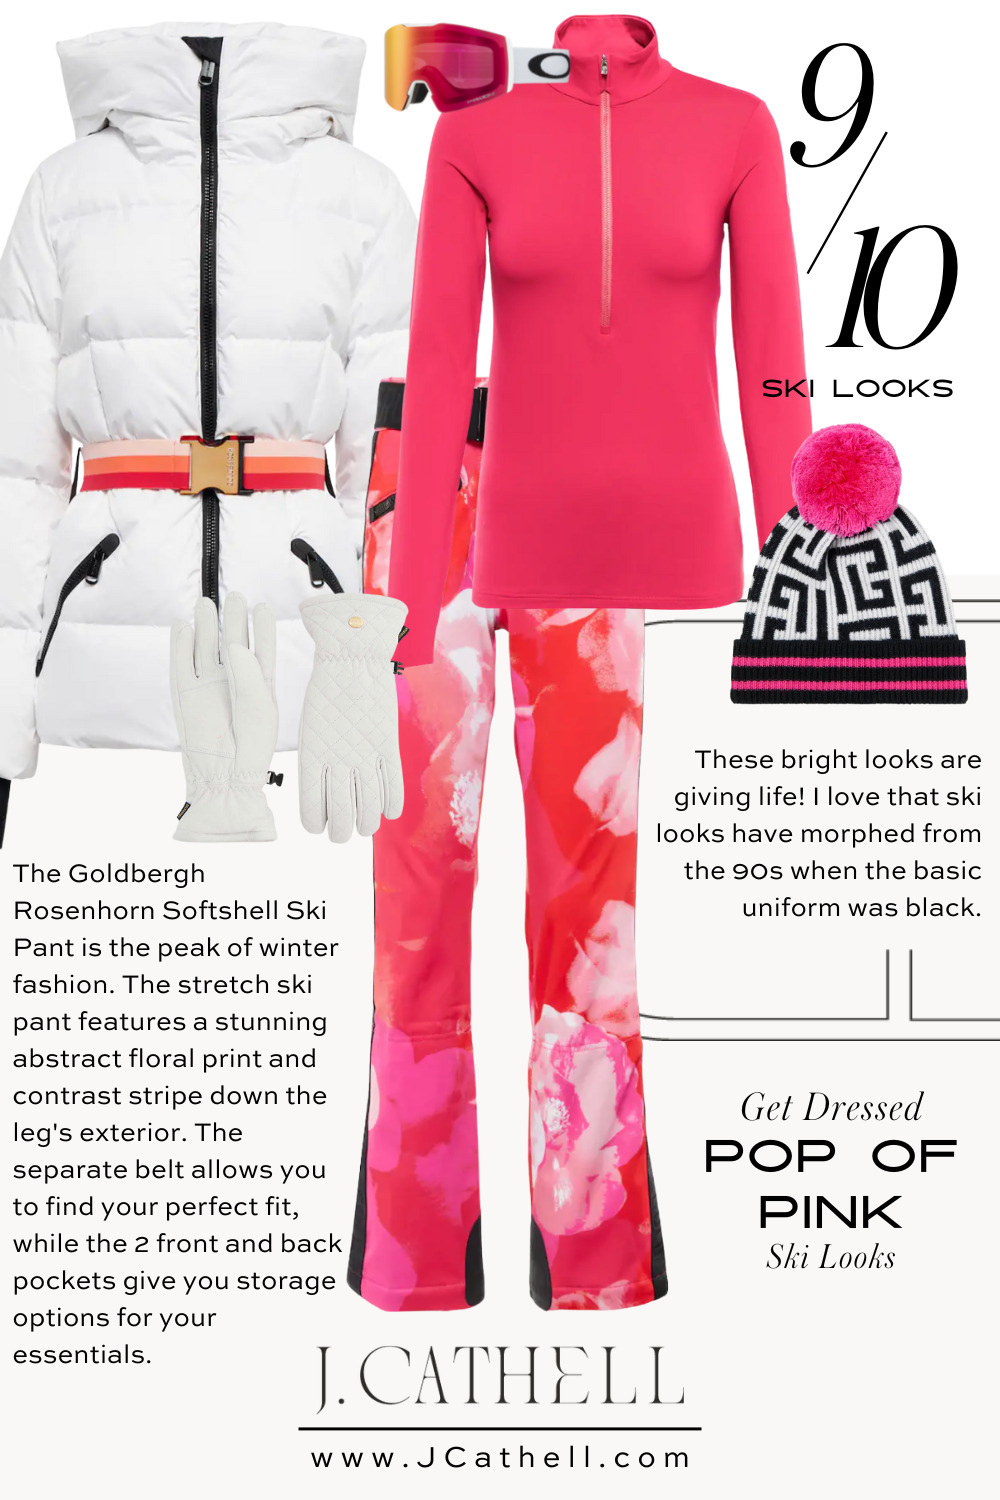 The Best Ski Looks for Your Winter Getaway - J. Cathell